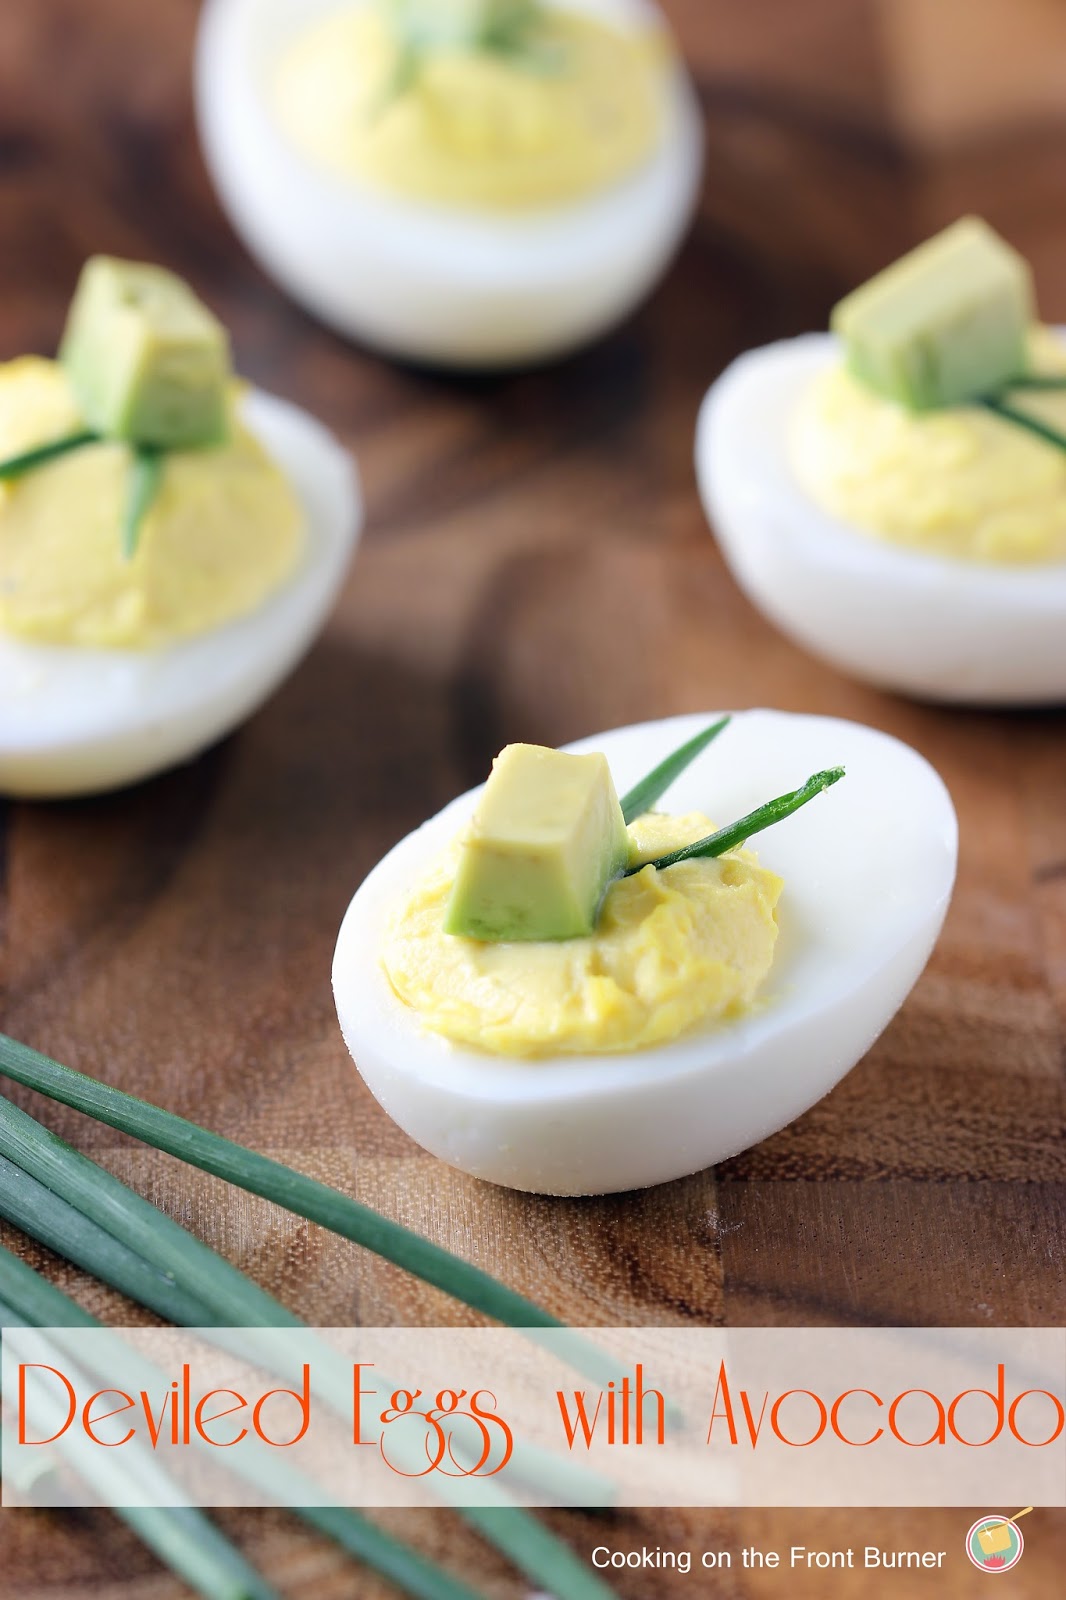 Deviled Eggs with Avocado | Cooking on the Front Burner